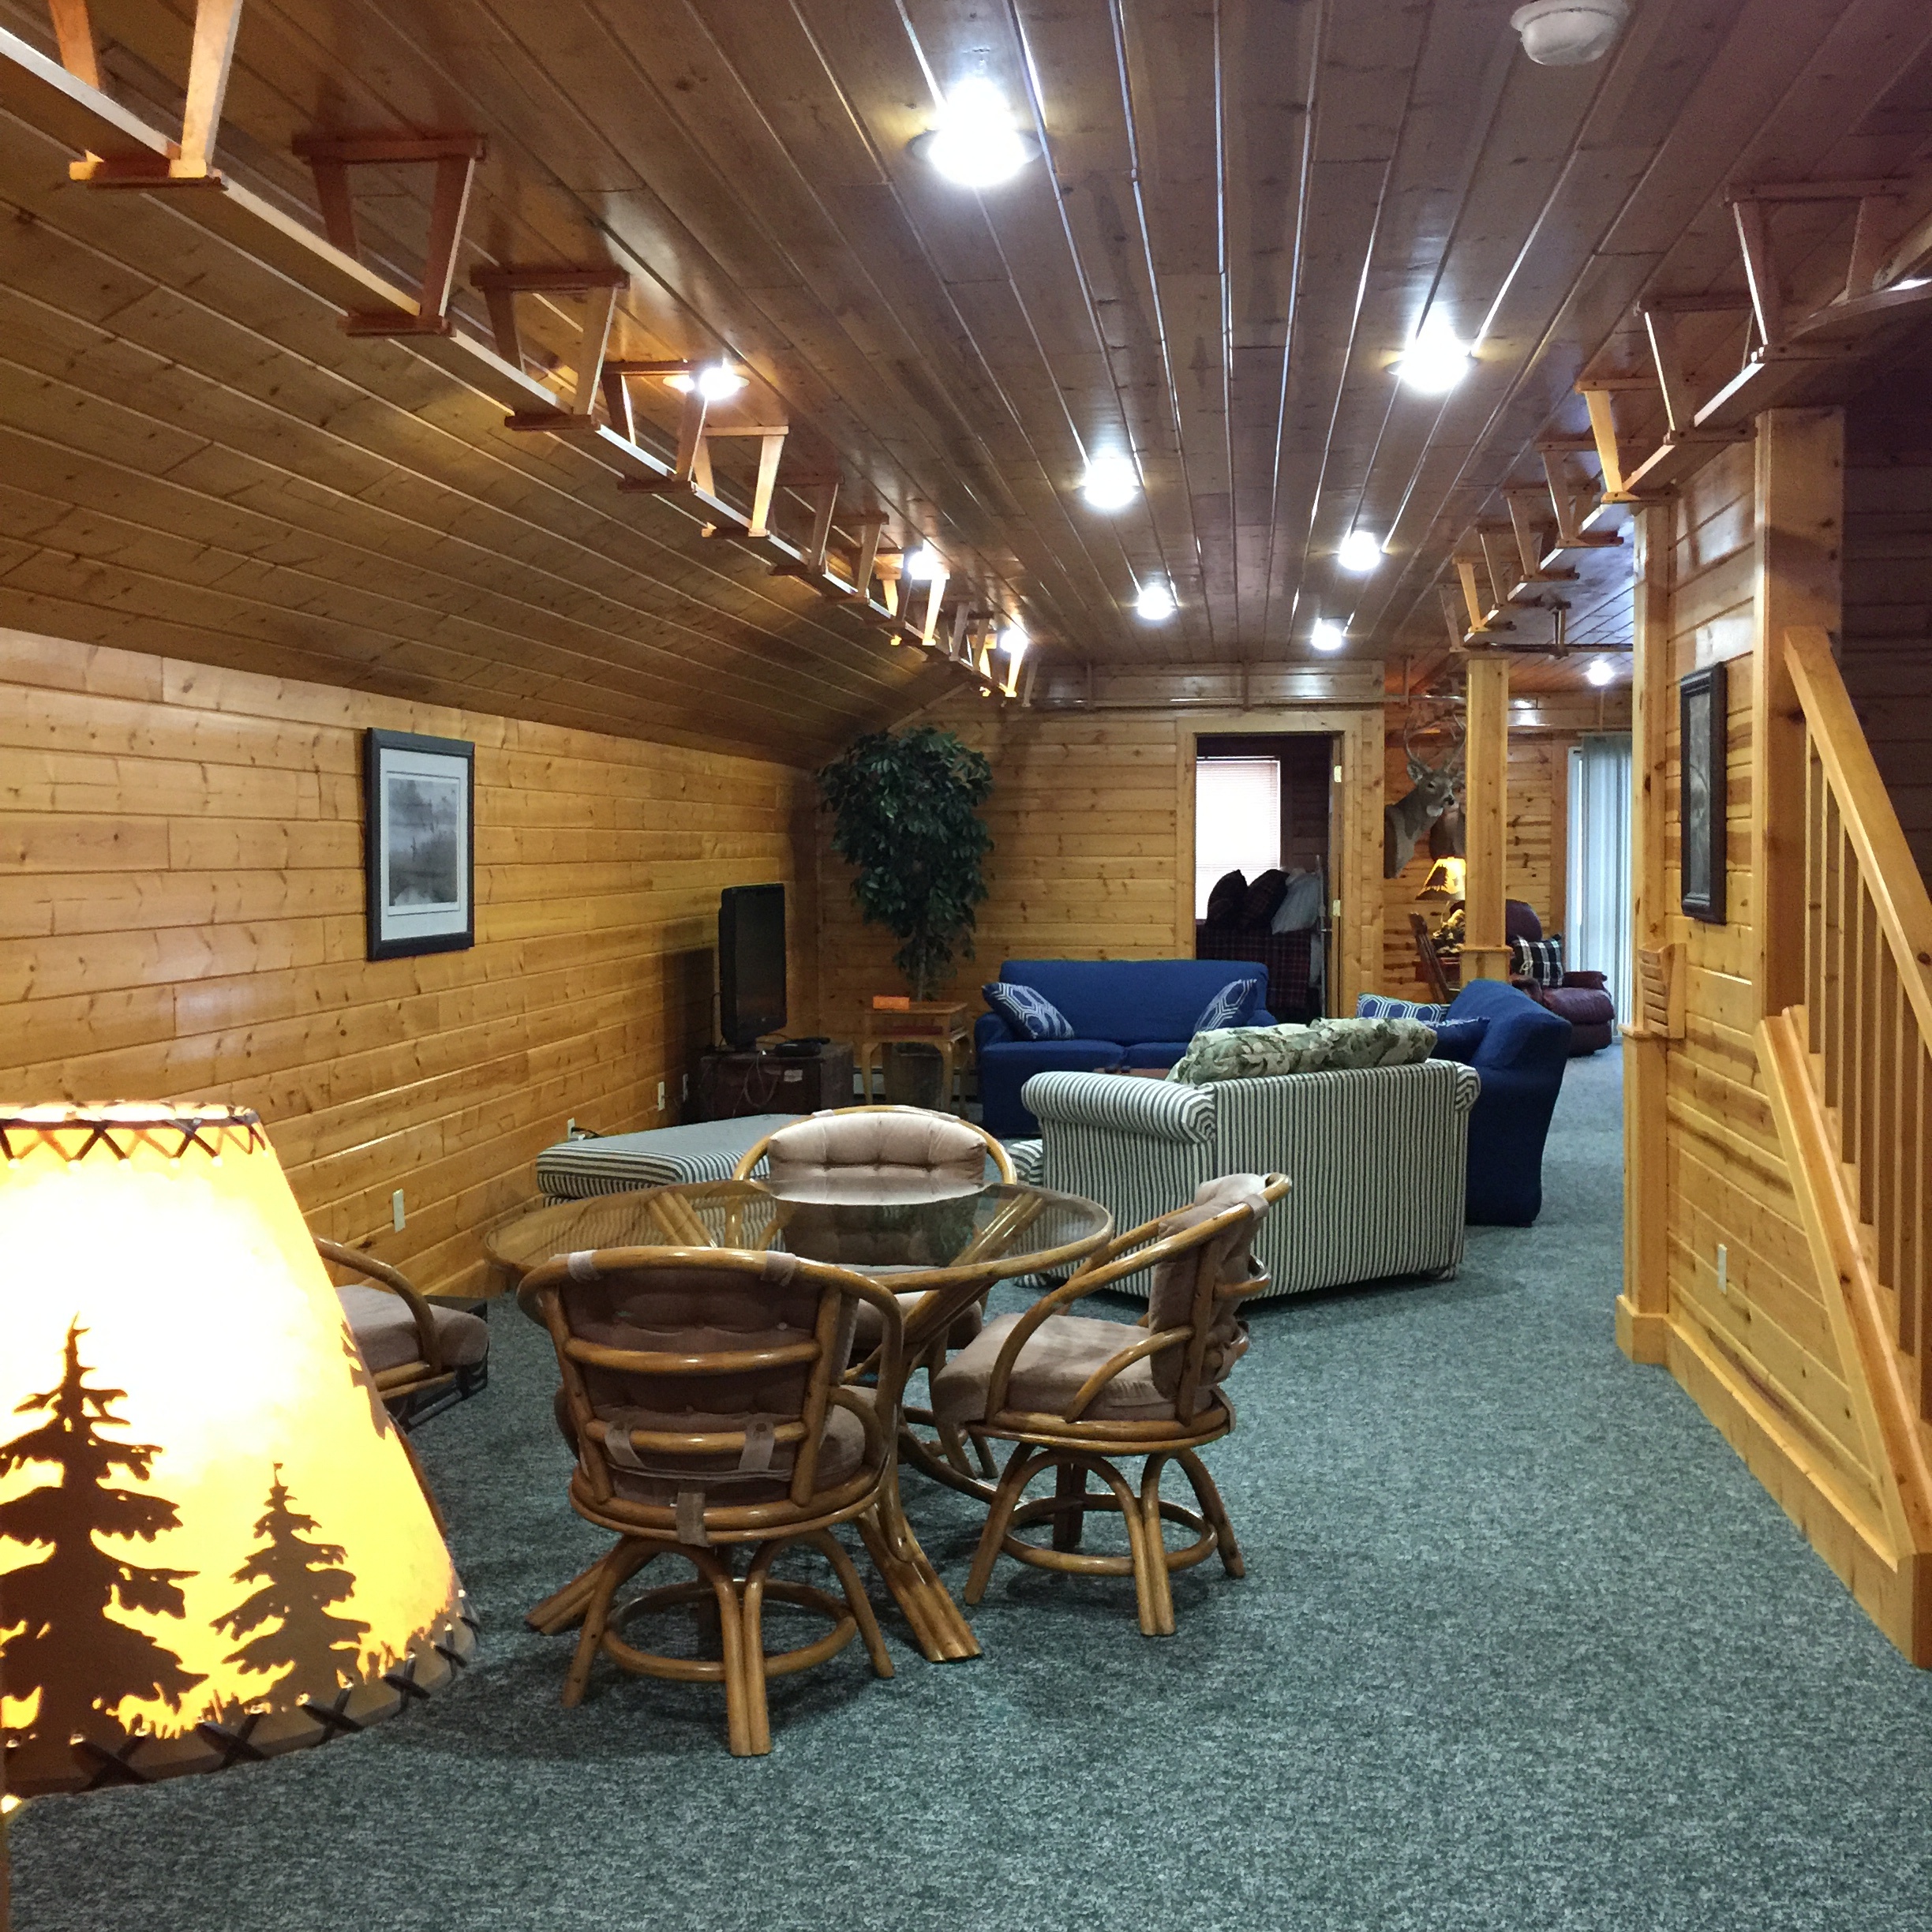 Seating area with cable TV at Torch Lake Lodge. All areas have high speed internet. Yes, there is an model train track around the entire 2nd floor. Train not included :).